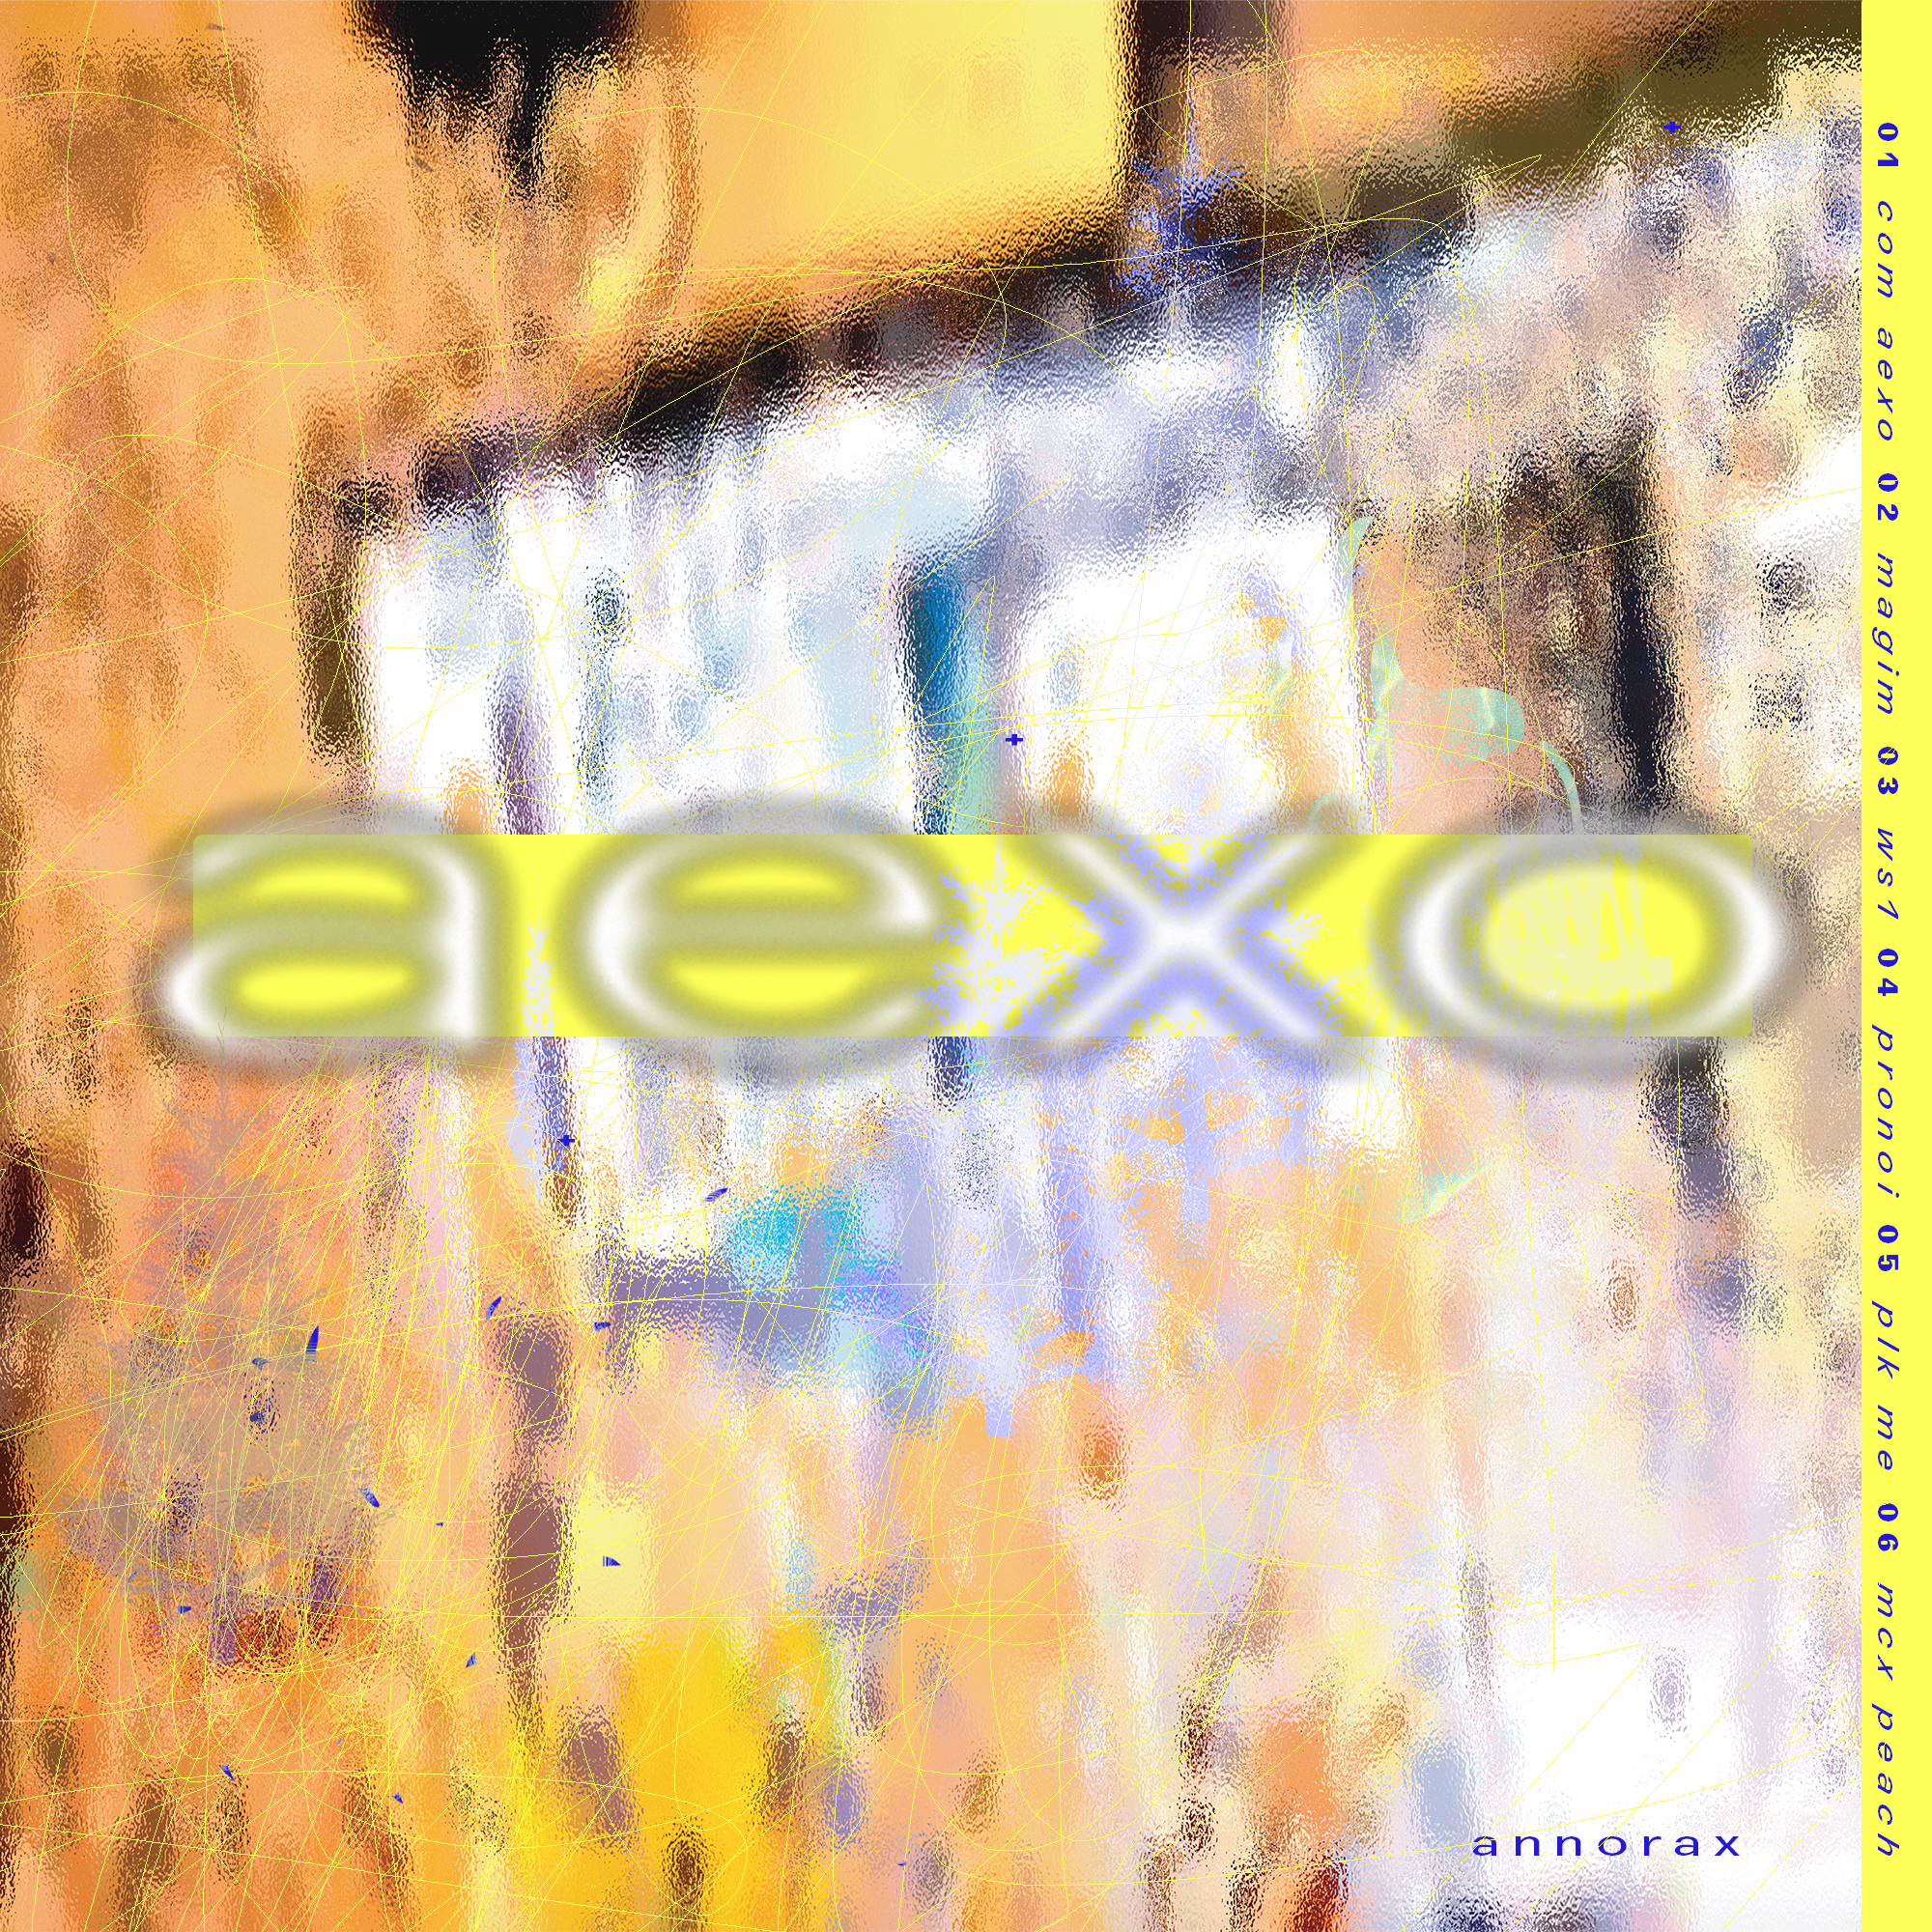 Annorax - Aexo